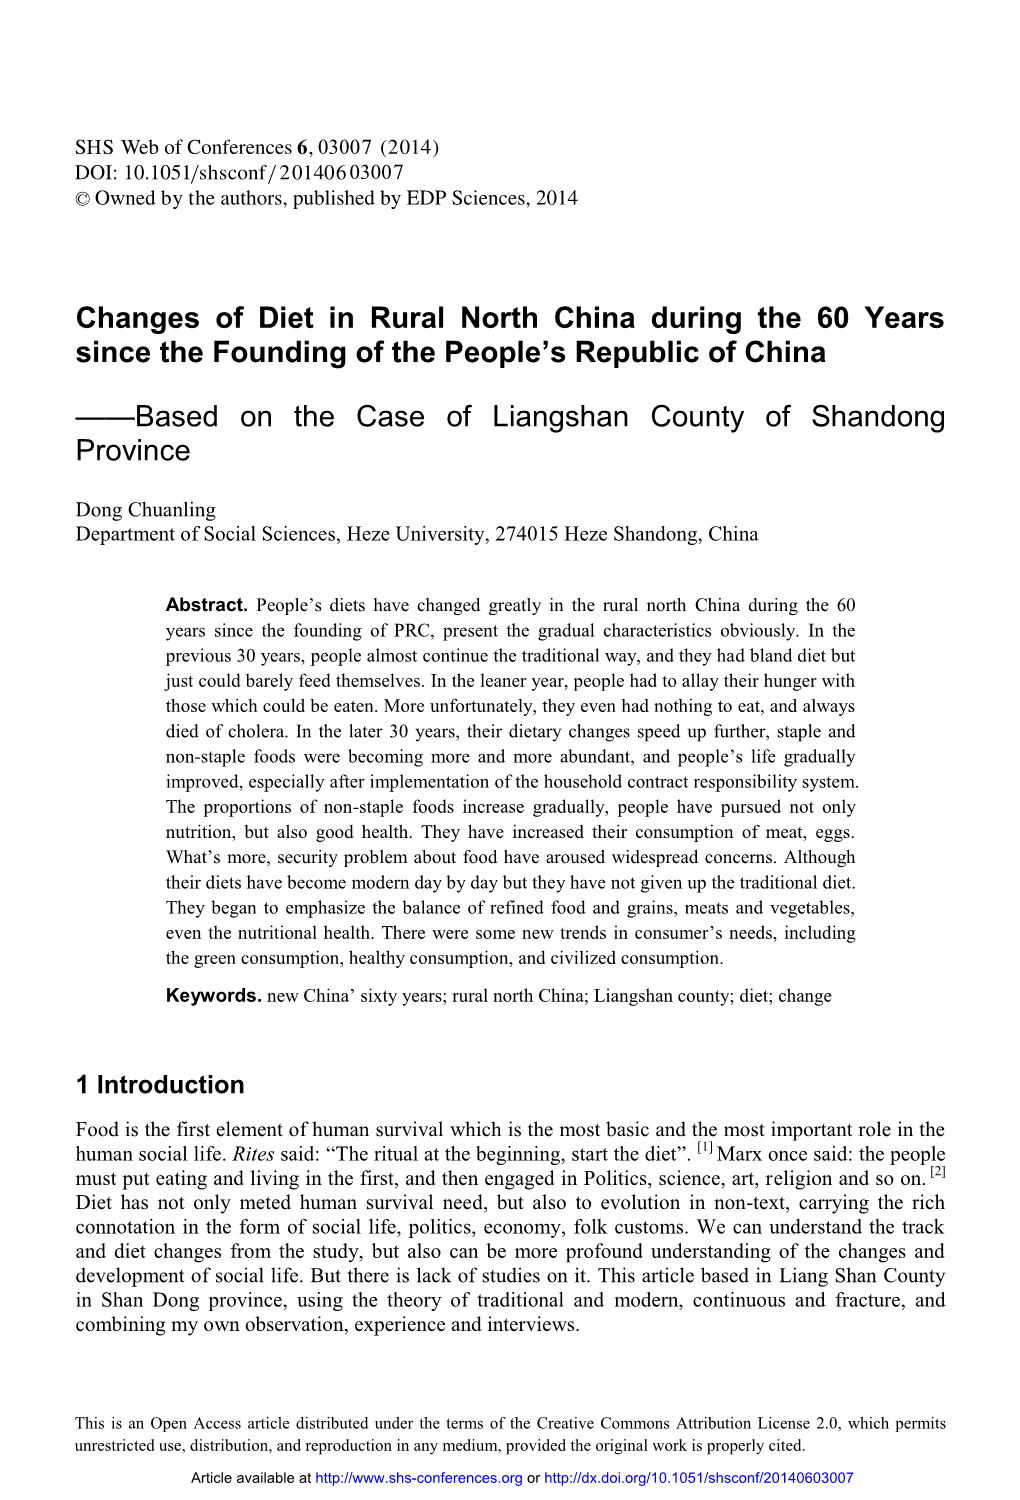 Changes of Diet in Rural North China During the 60 Years Since the Founding of the People's Republic of China